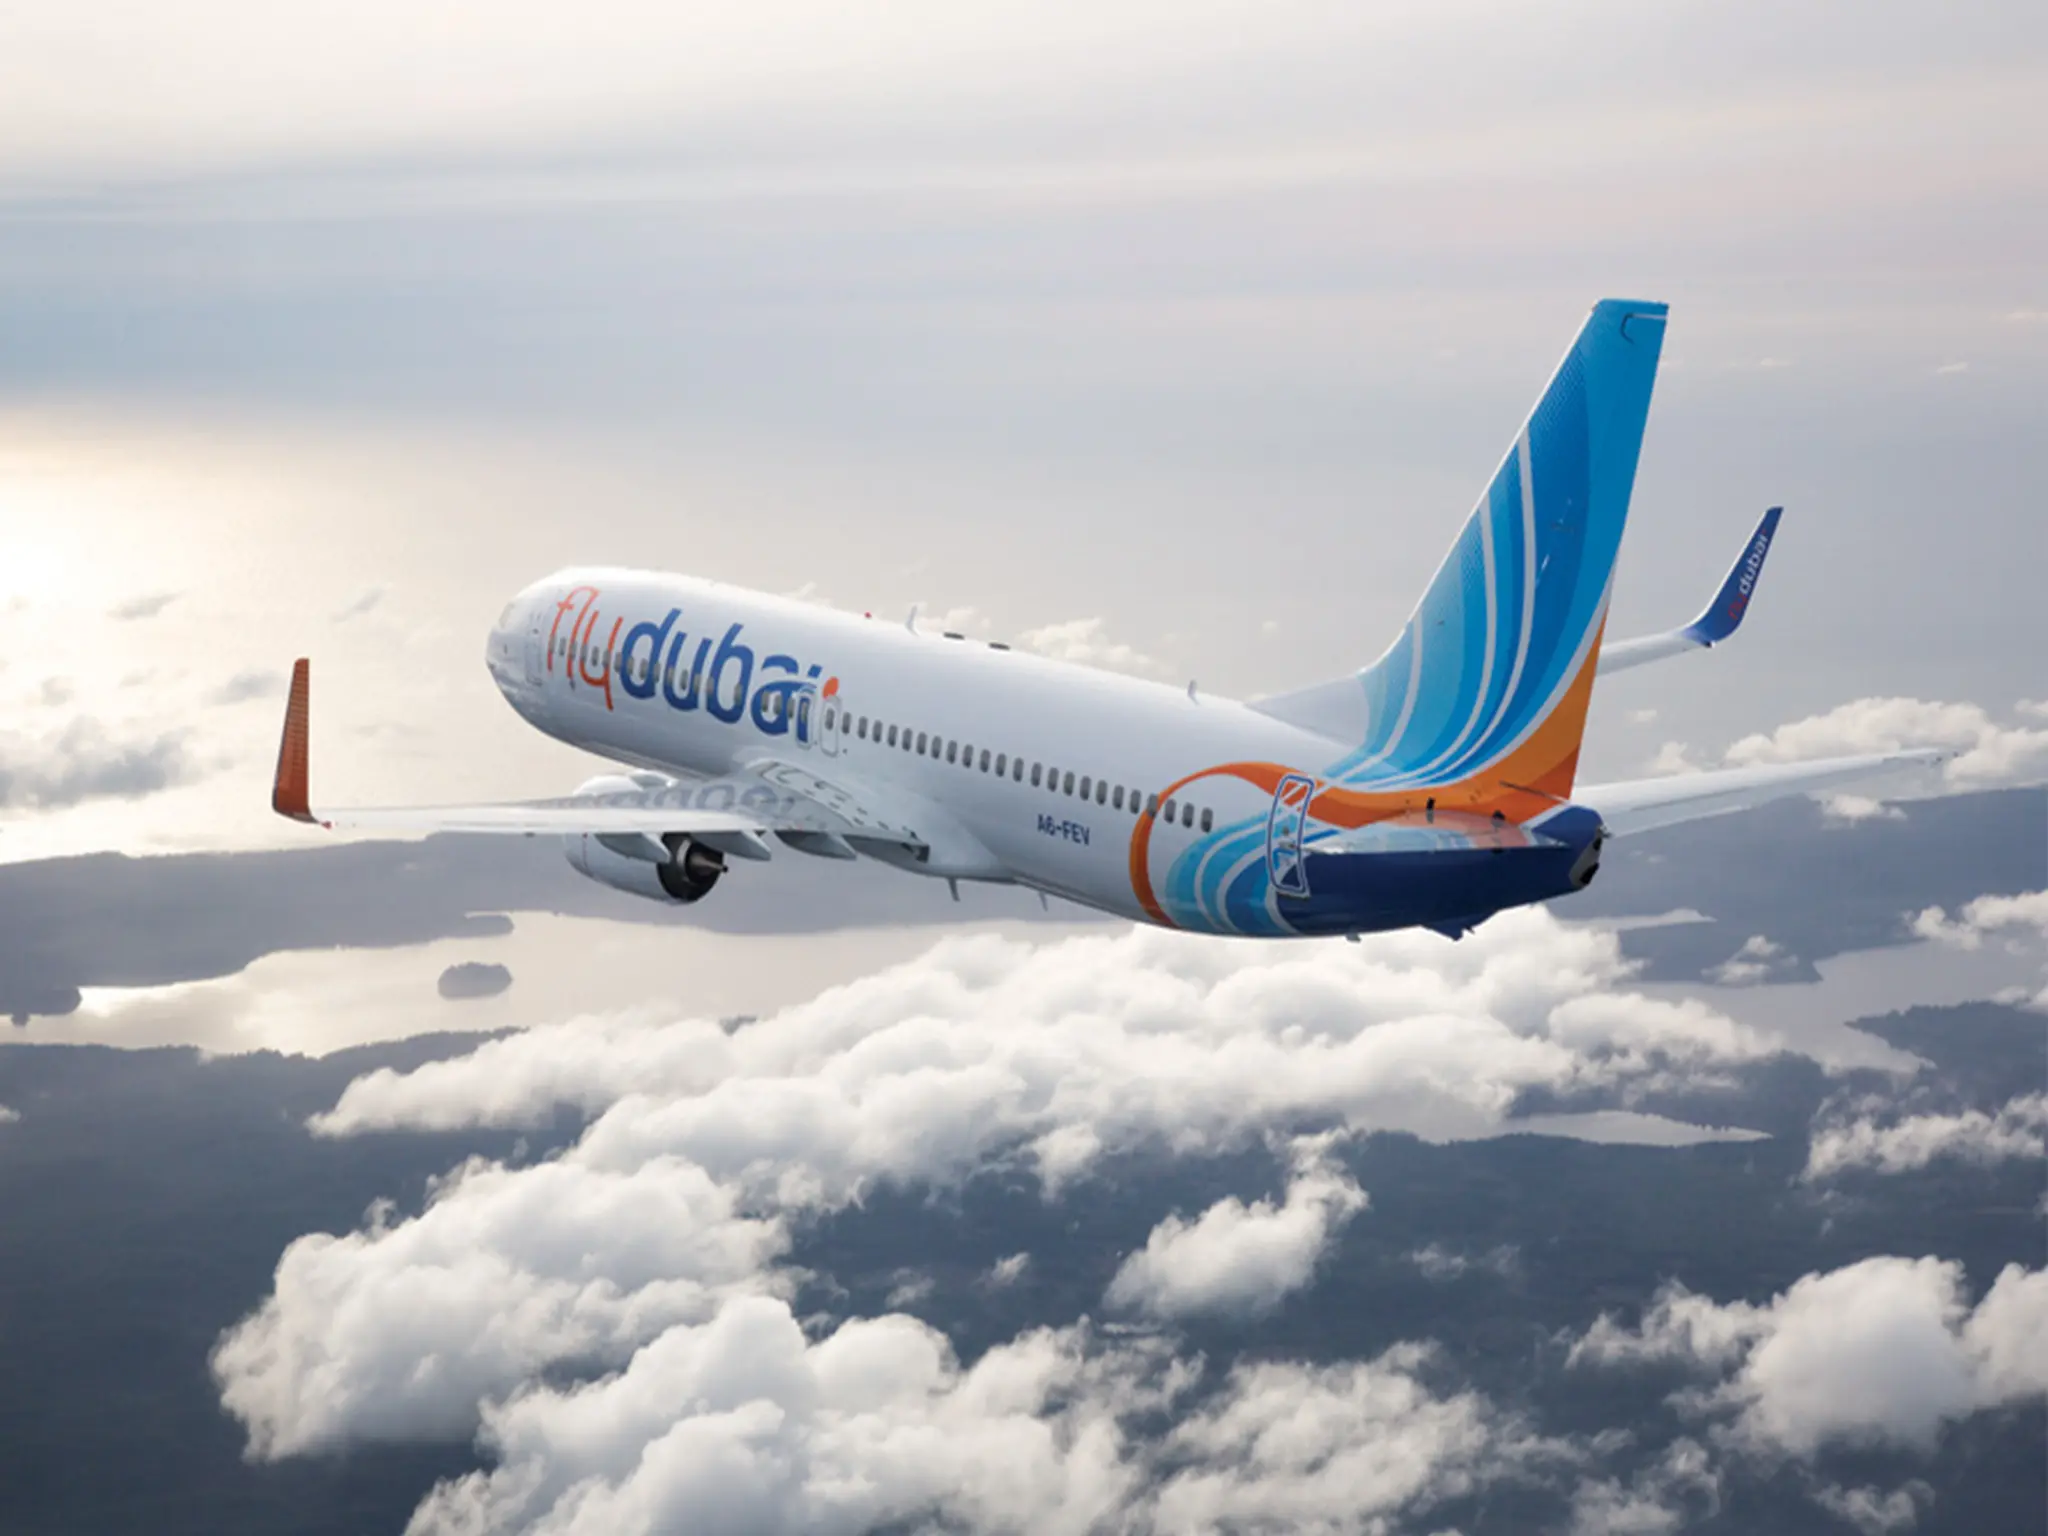 Urgent .. «Flydubai» launches great offers for travelers on some of its flights on the occasion of the Eid Al-Fitr